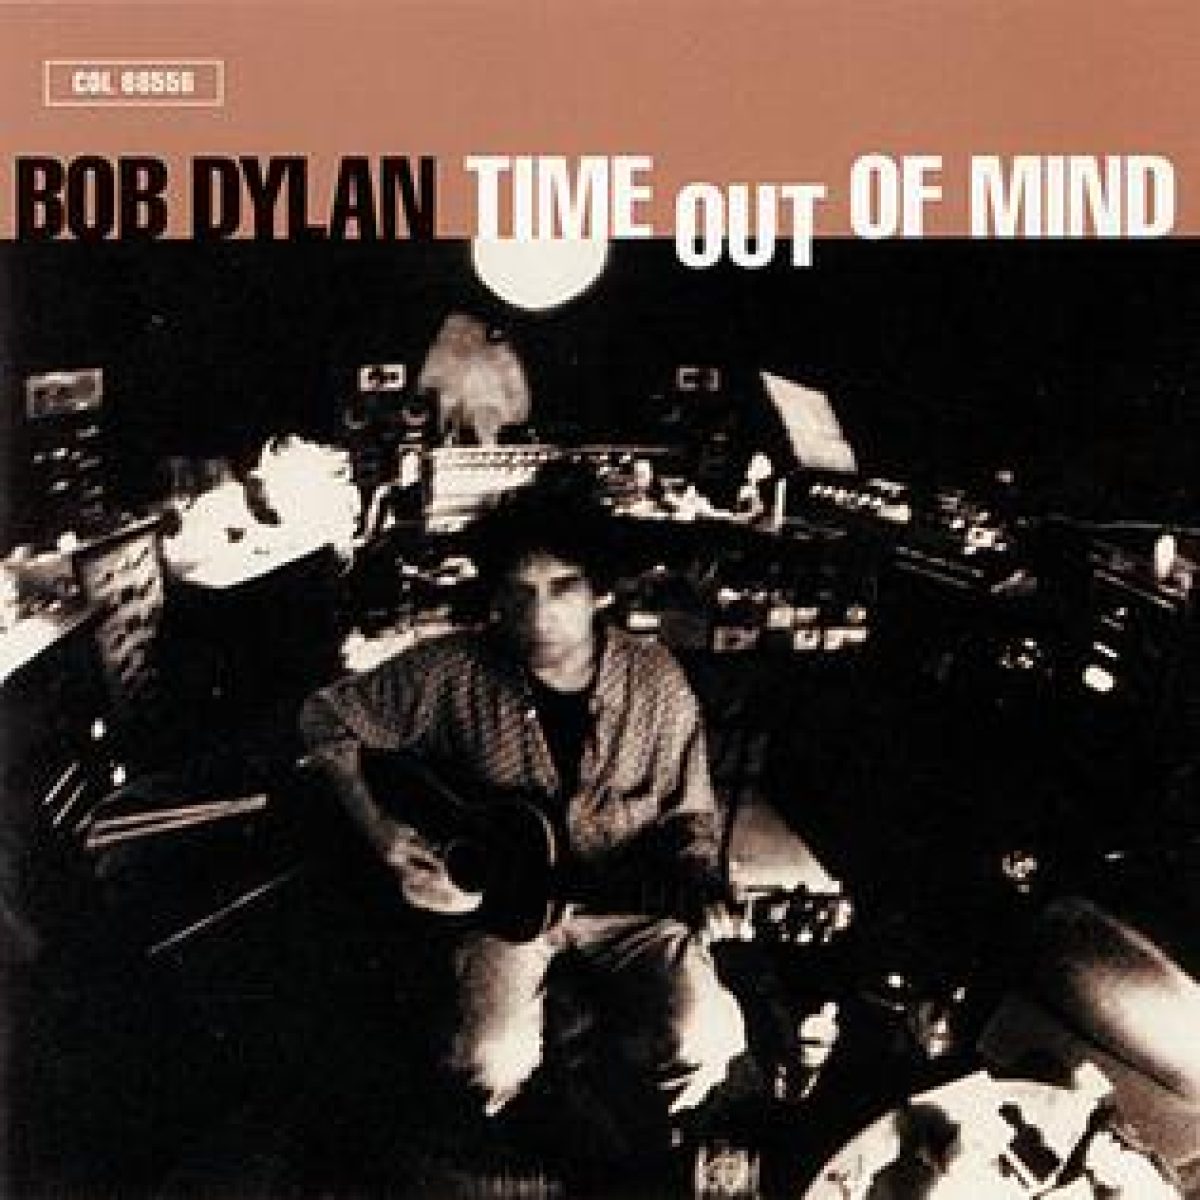 Bob Dylan, Time out of Mind